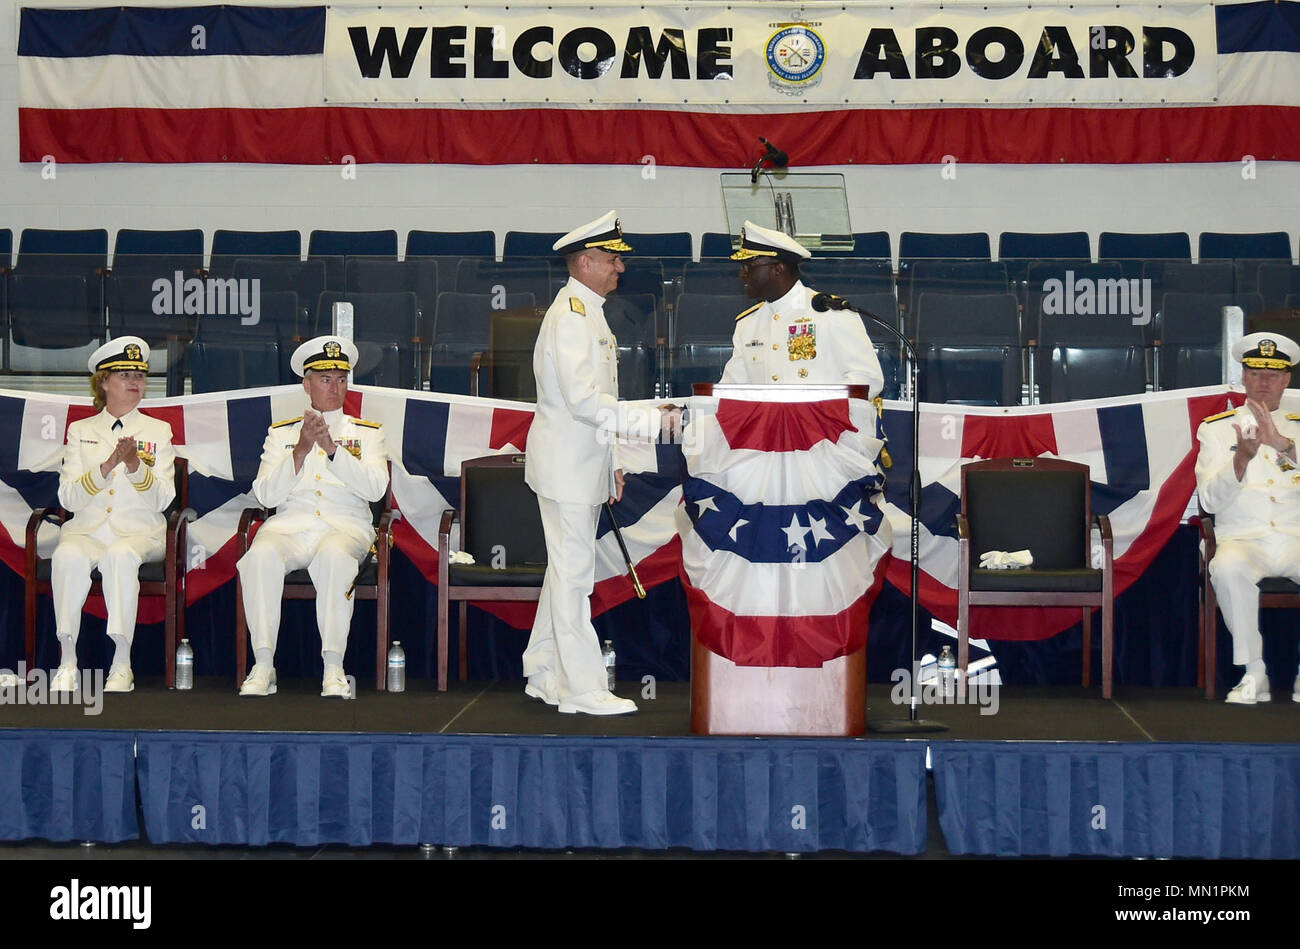 GREAT LAKES, Ill., (August 9, 2017) -- Rear Adm. Stephen C. Evans (right) is congratulated by Vice Adm. Robert P. Burke, Chief of Naval Personnel, during a Change of Command ceremony in the Midway Ceremonial Drill Hall at Recruit Training Command (RTC), the Navy’s only boot camp, on Naval Station Great Lakes, August 9. Evans was relieved as the commander of Naval Service Training Command (NSTC) by Rear Adm. Mike Bernacchi (seated left). Evans will report as Commander, Carrier Strike Group Two, embarked on board USS George H. W. Bush (CVN 77), homeported in Norfolk, Virginia. Burke was the keyn Stock Photo